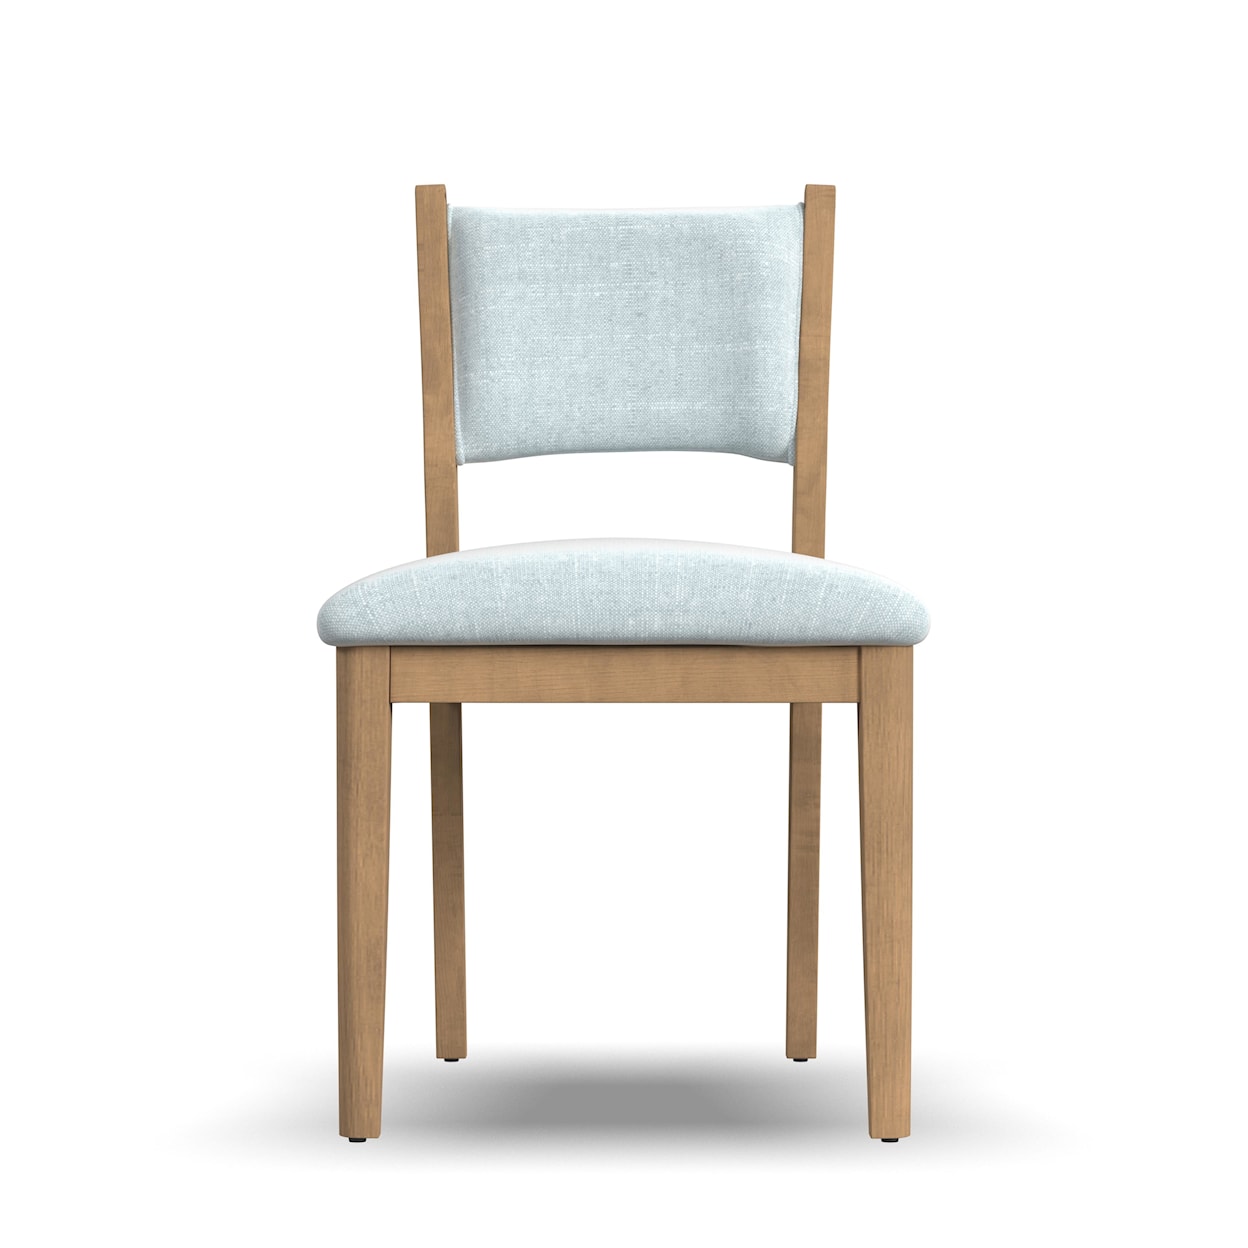 Wynwood, A Flexsteel Company Normandy Upholstered Dining Chair